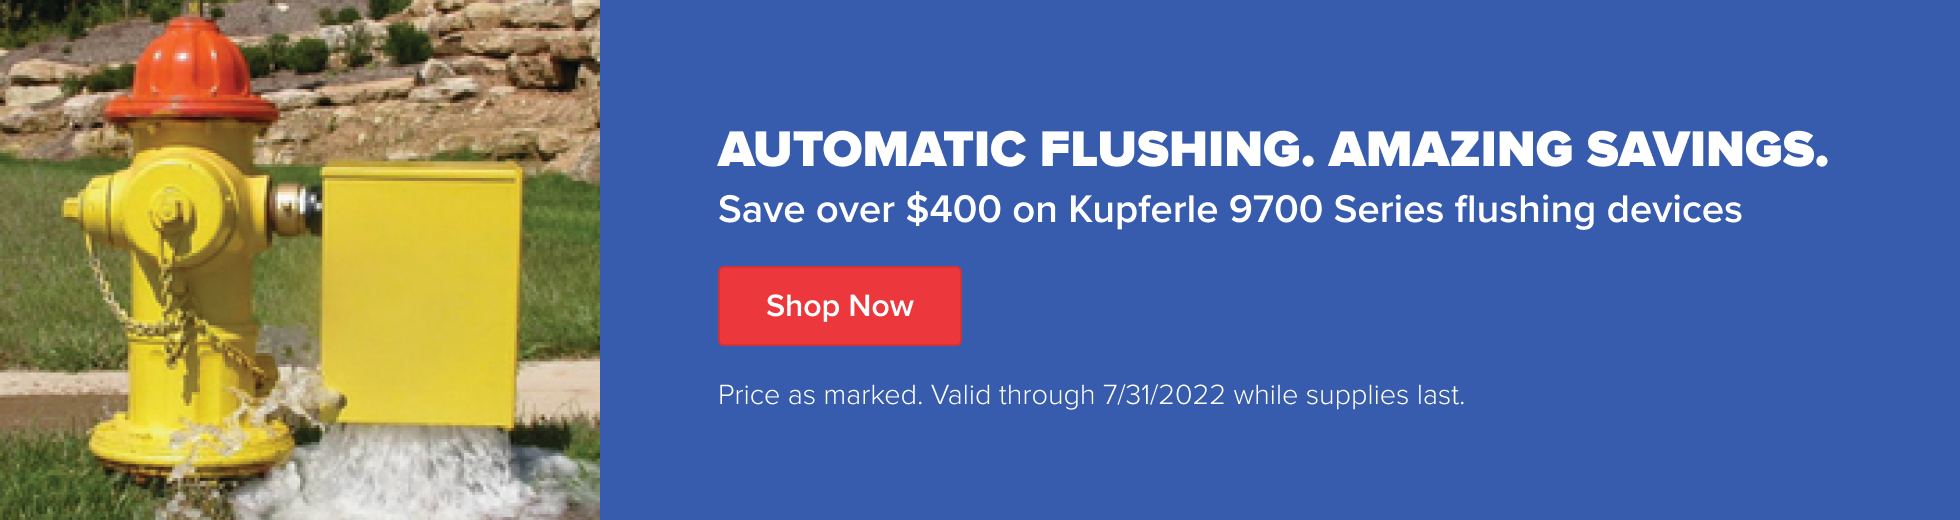 Save over $400 on Kupferle 9700 Series flushing devices